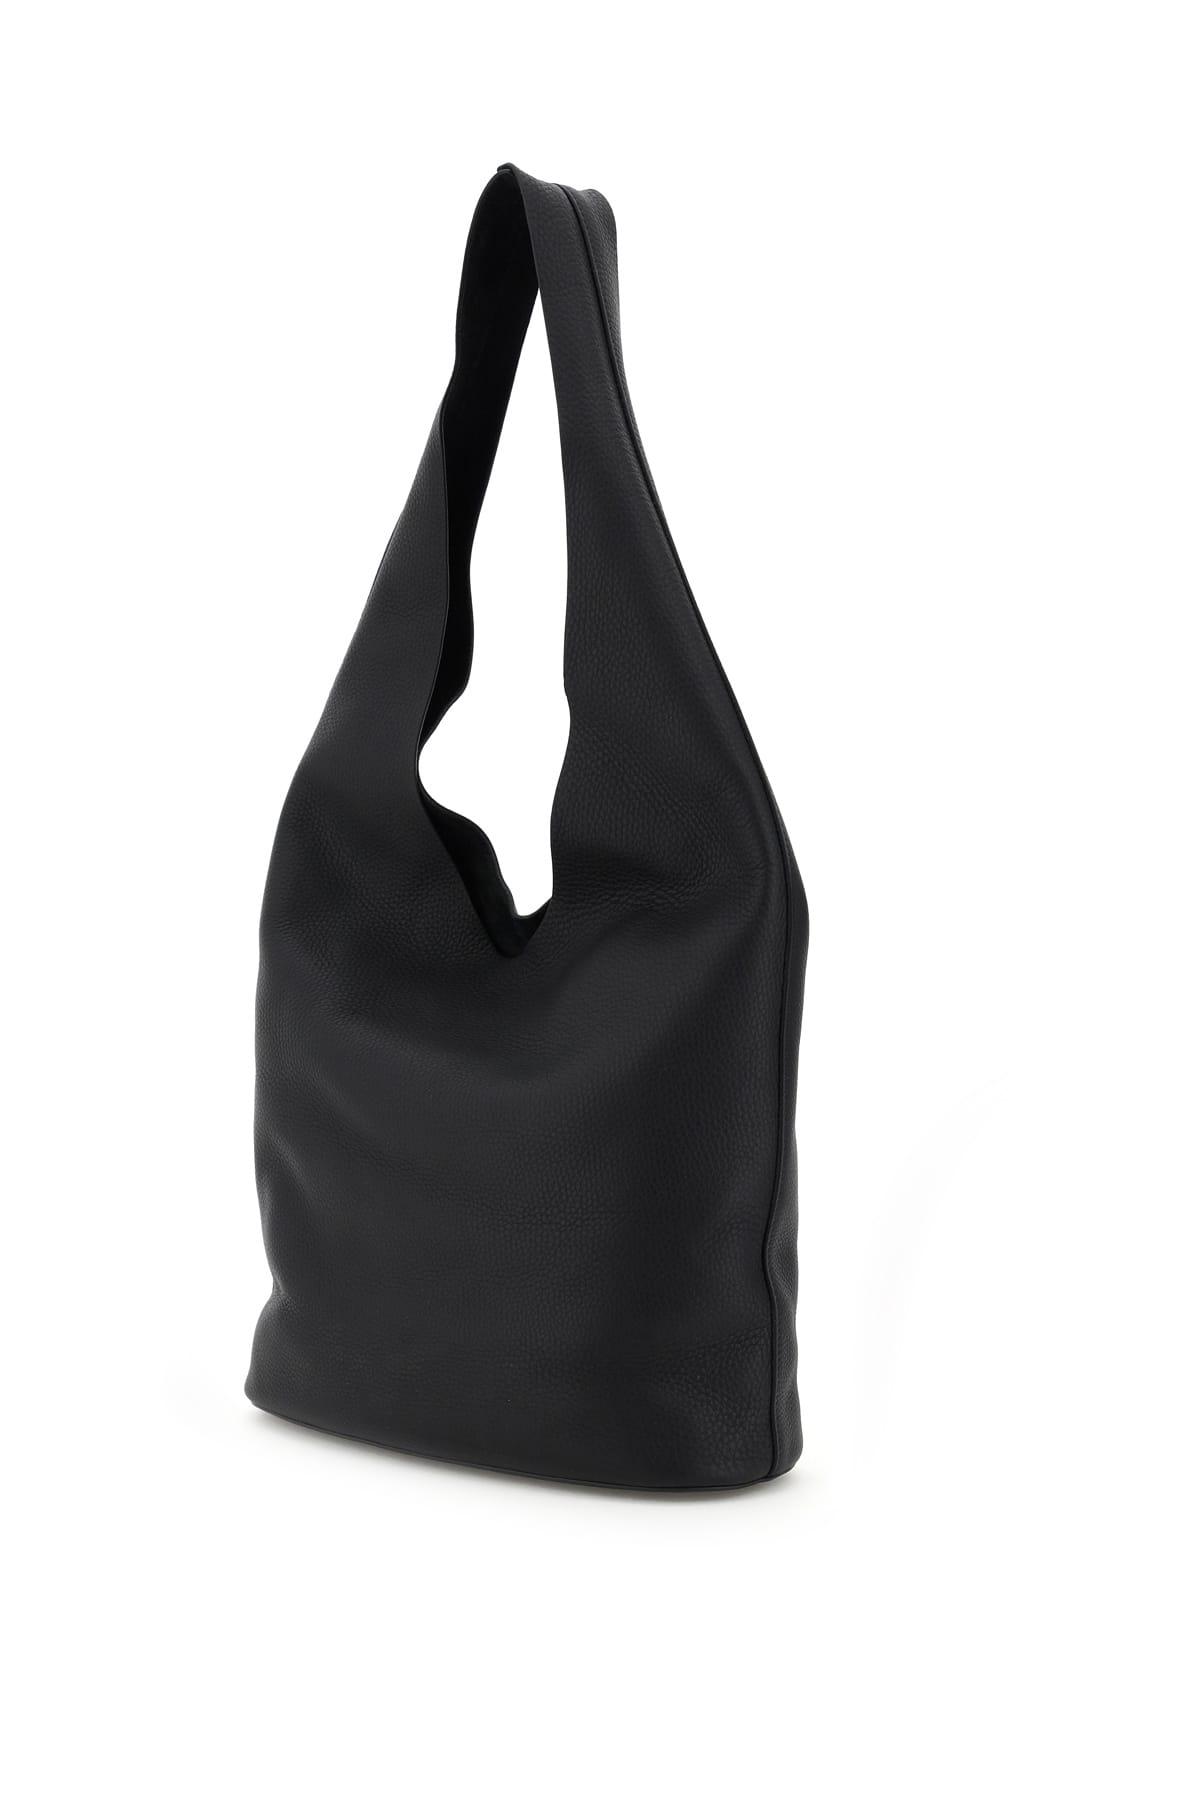 The Row Leather Bindle Three Hobo Bag in Black - Save 38% - Lyst